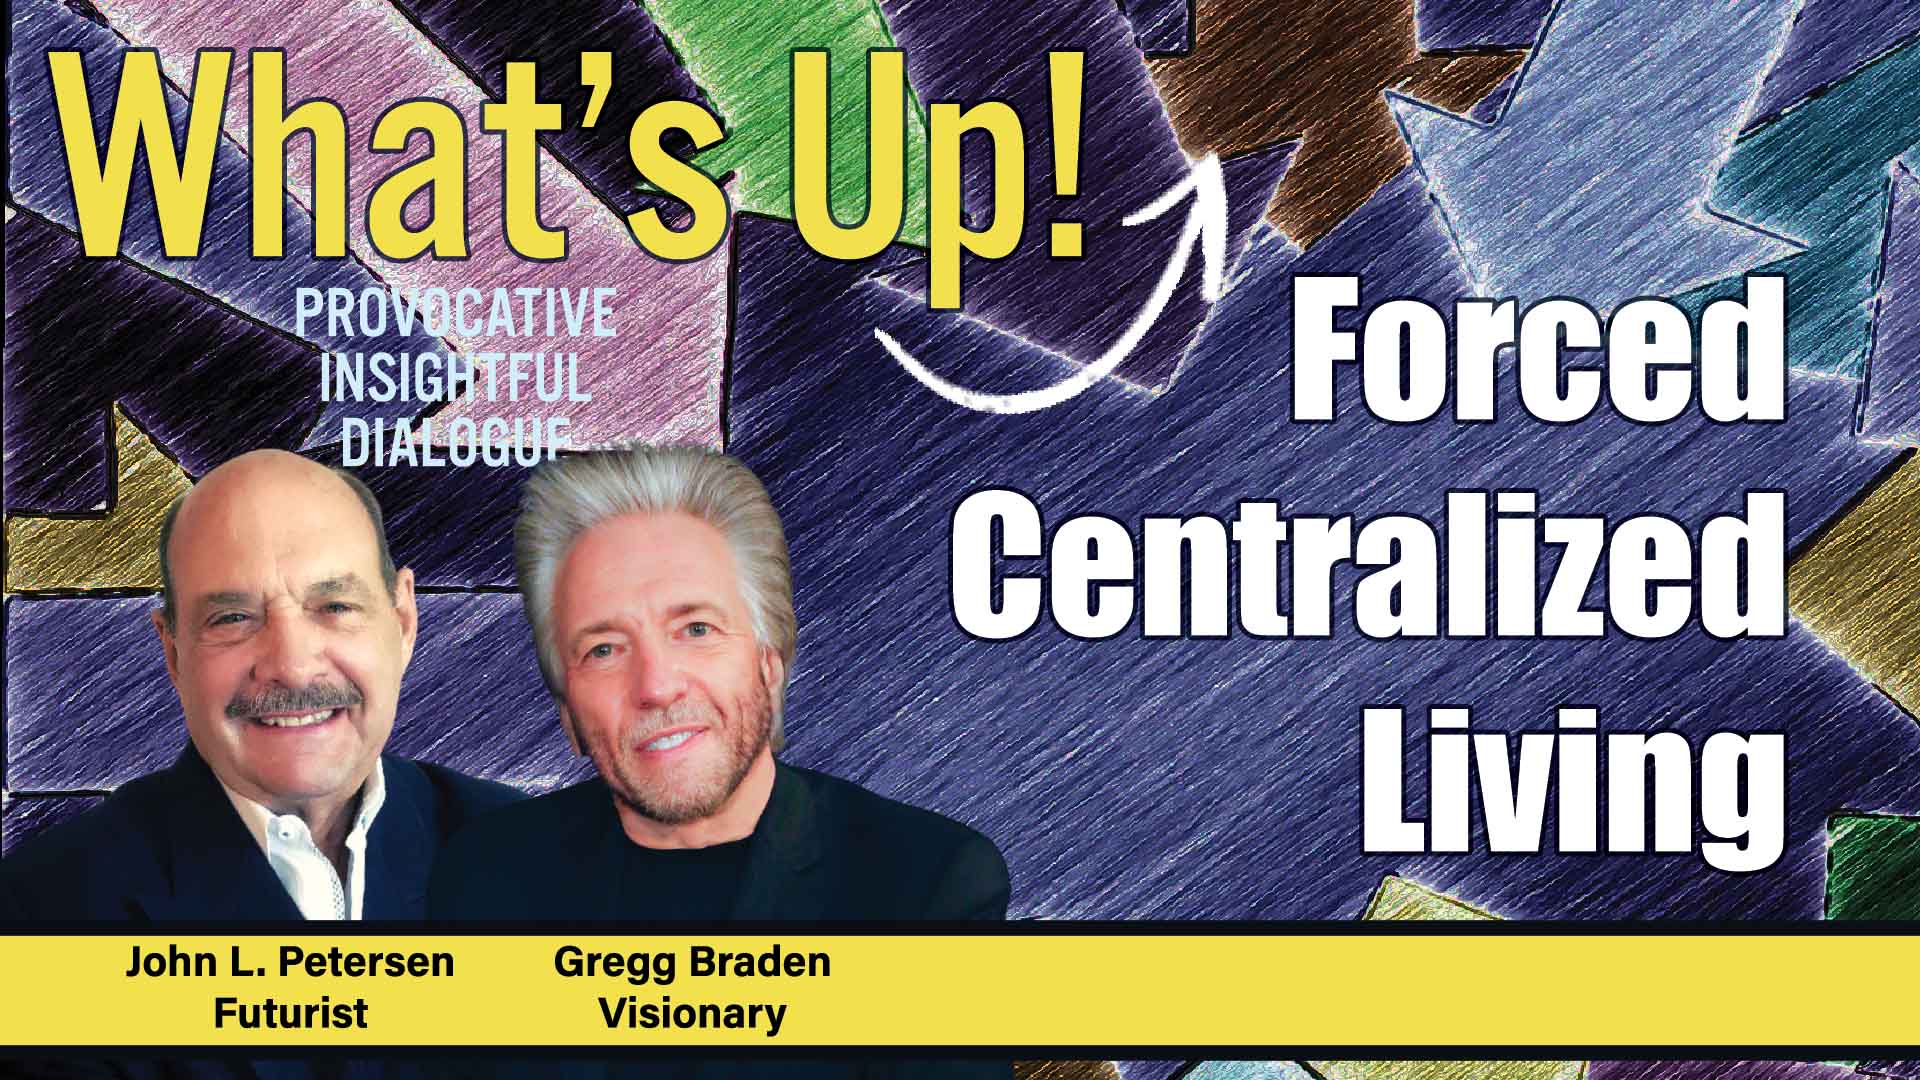 Forced Centralized Living, What's Up! Premium with Gregg Braden, John Petersen